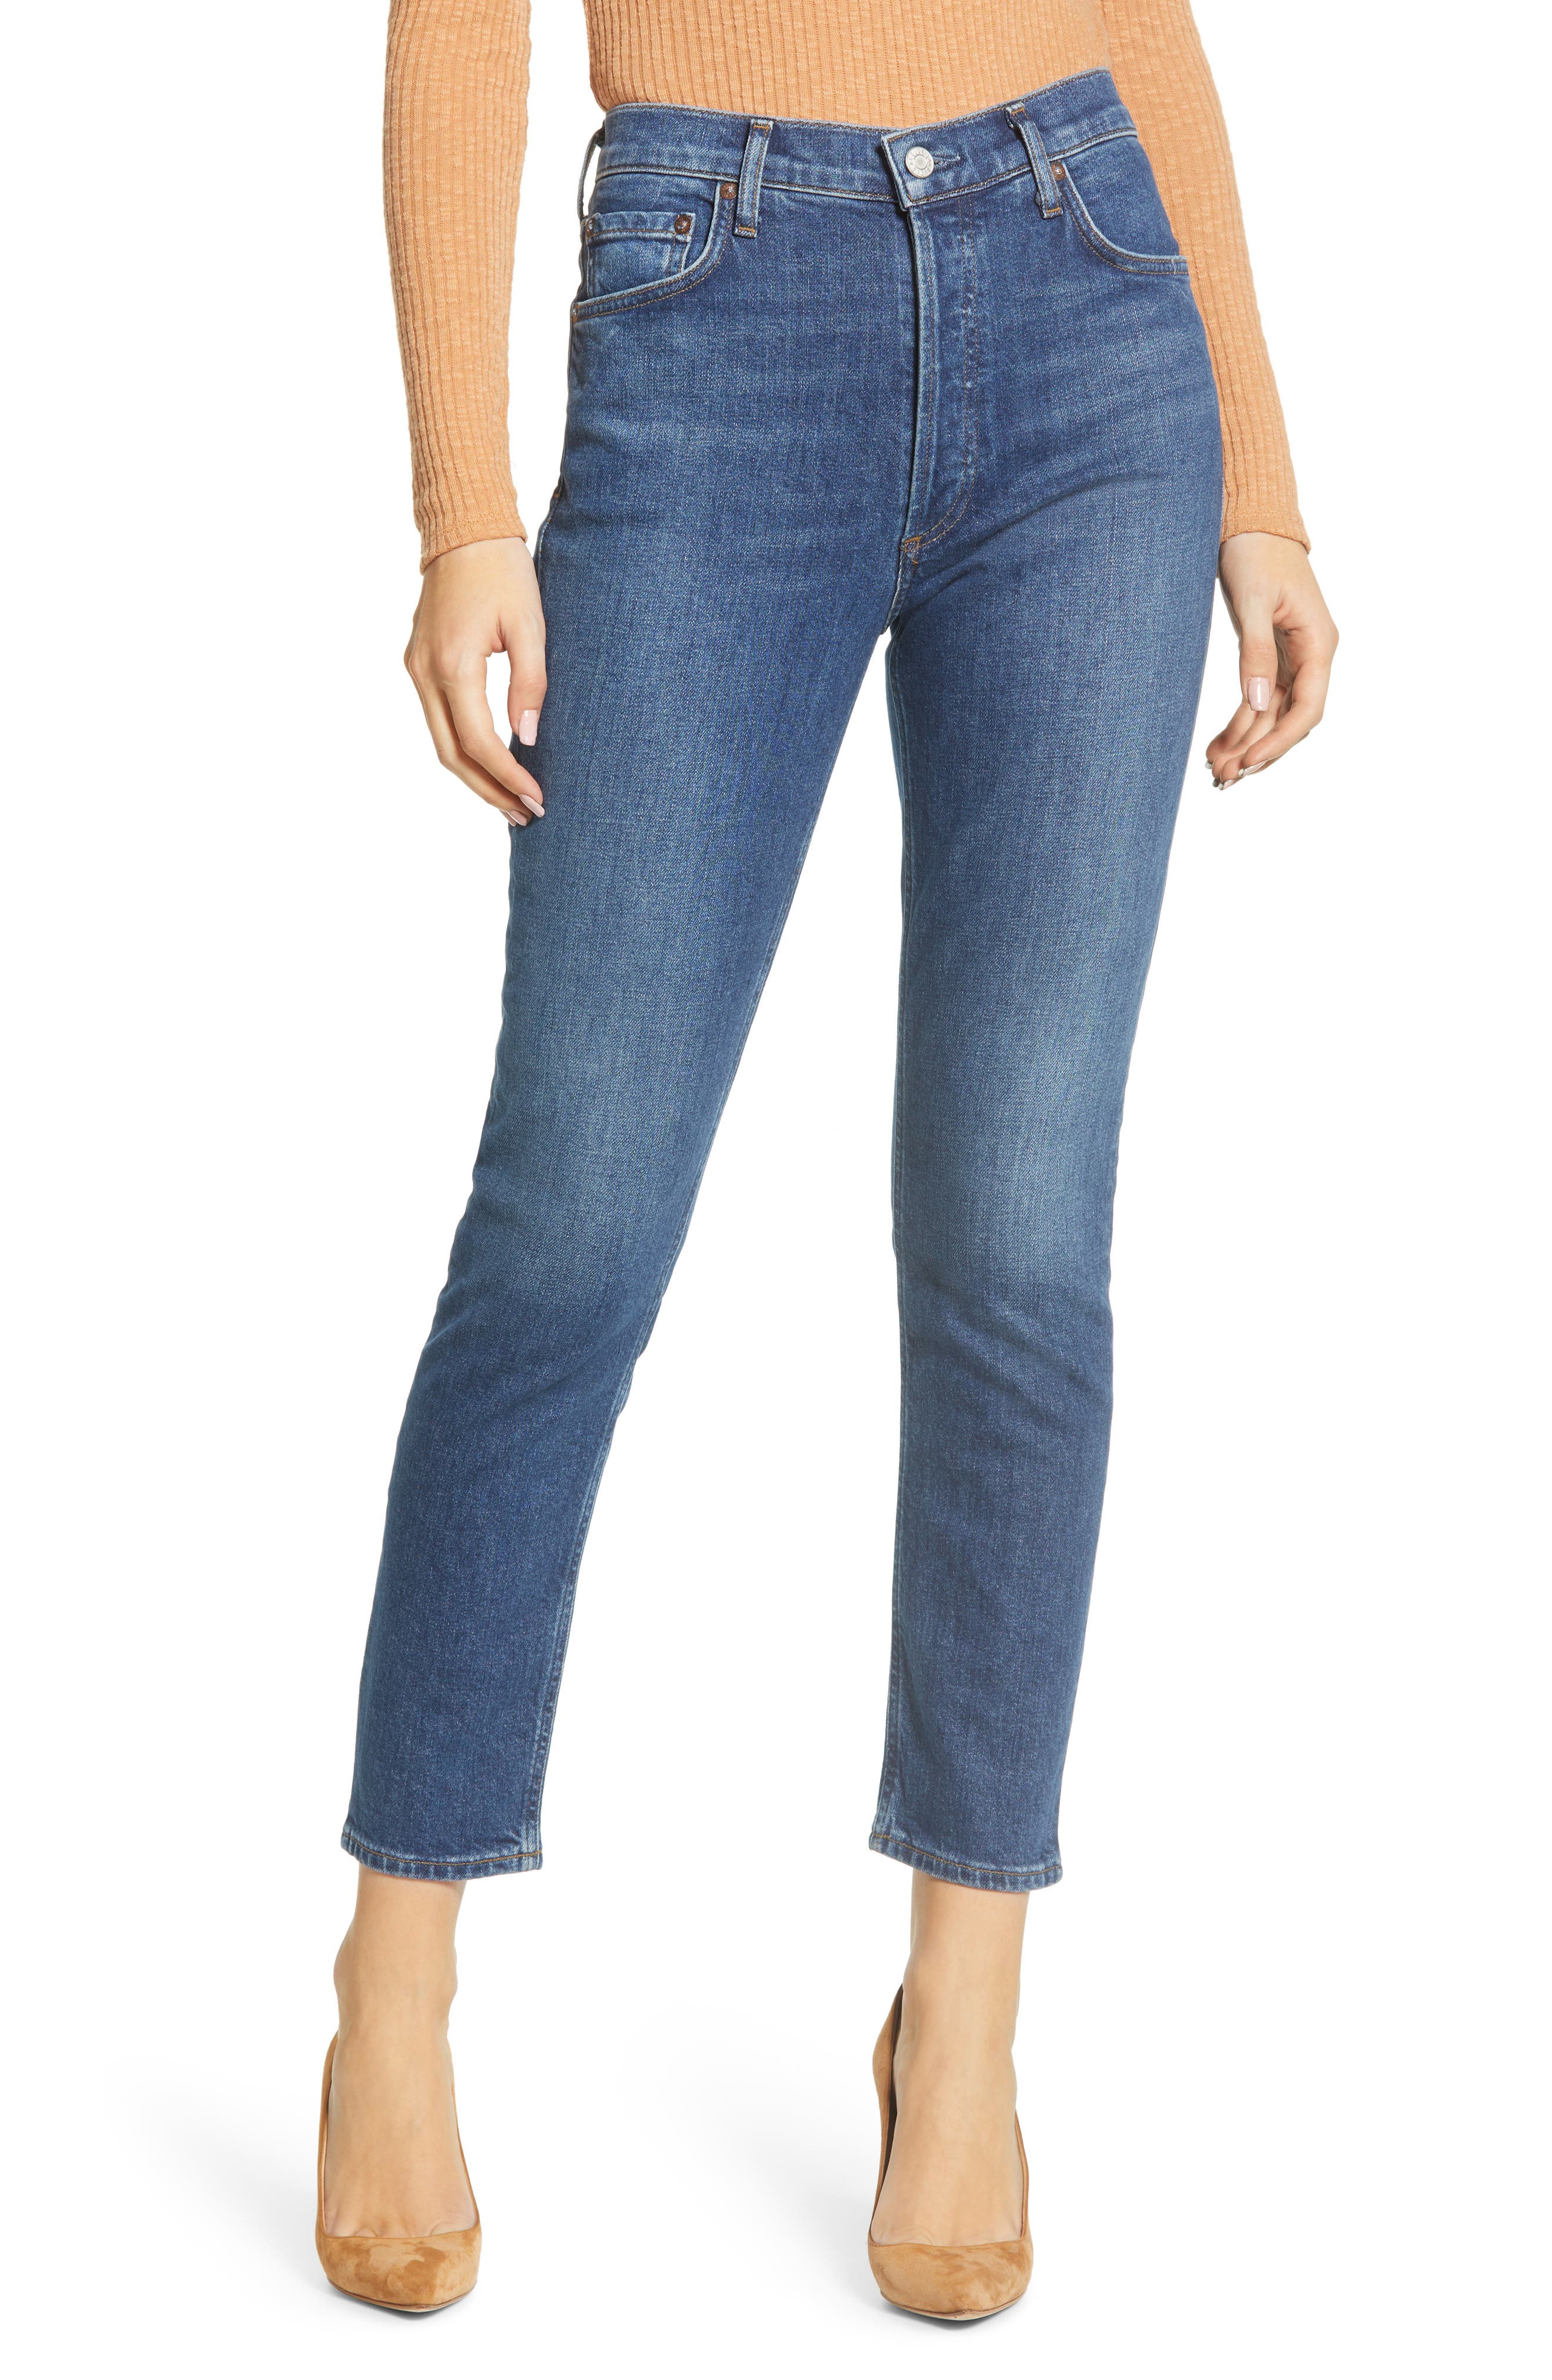 Agolde Nico High Waist Slim Fit Jeans In Fixation